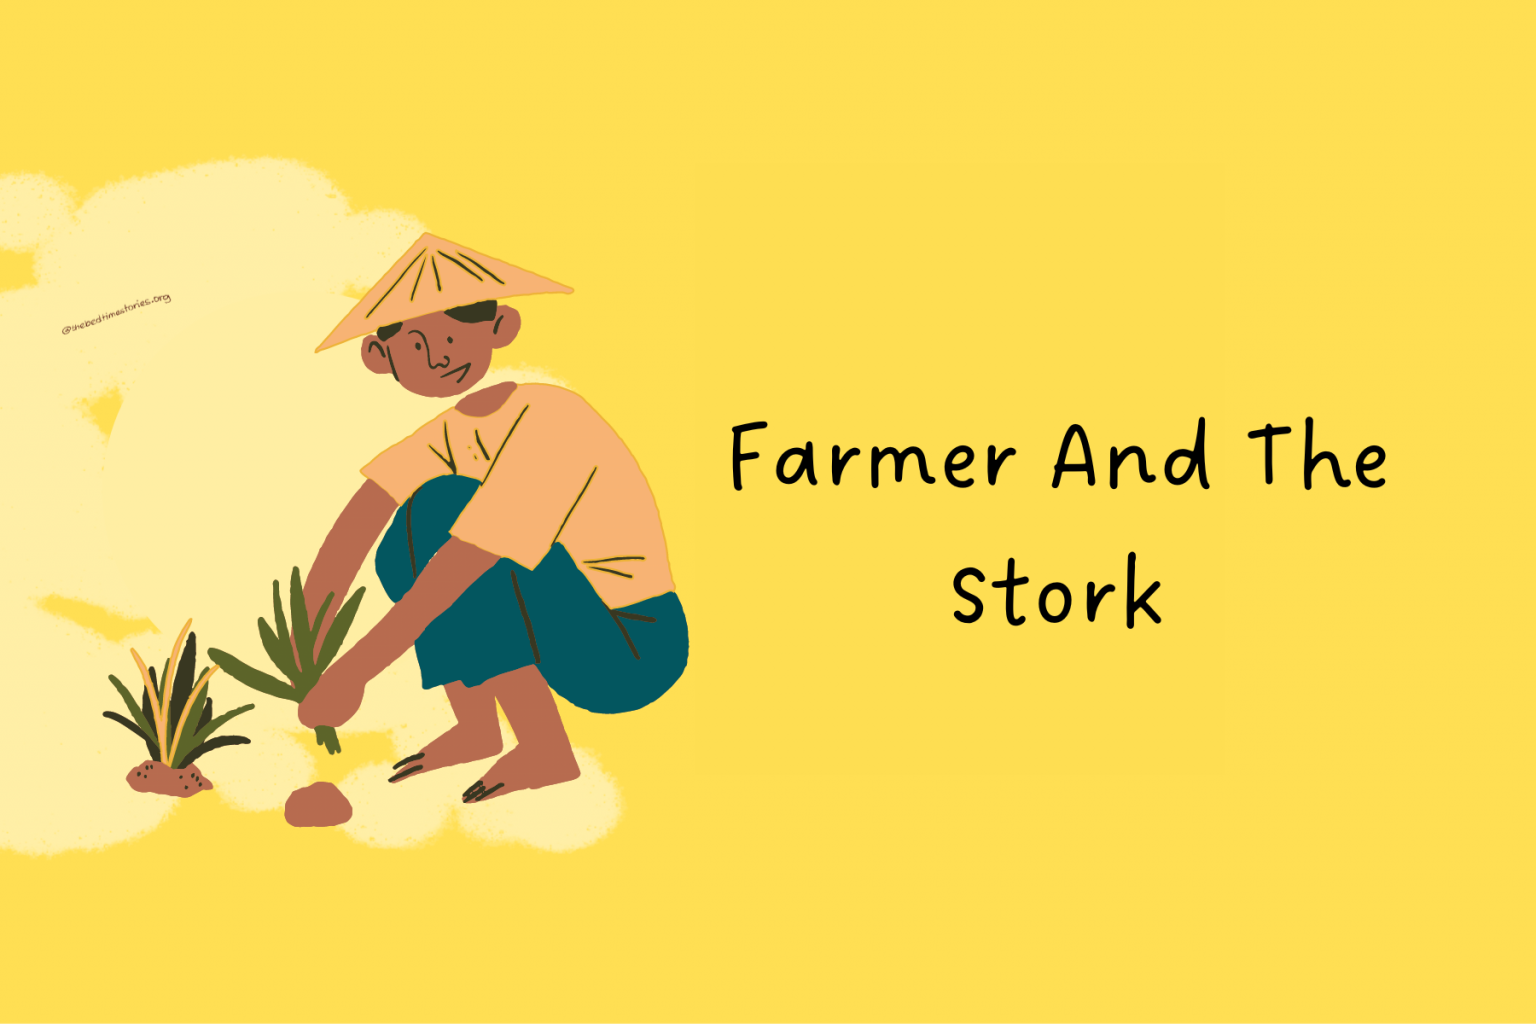 The Farmer And The Stork Bed Time Stories